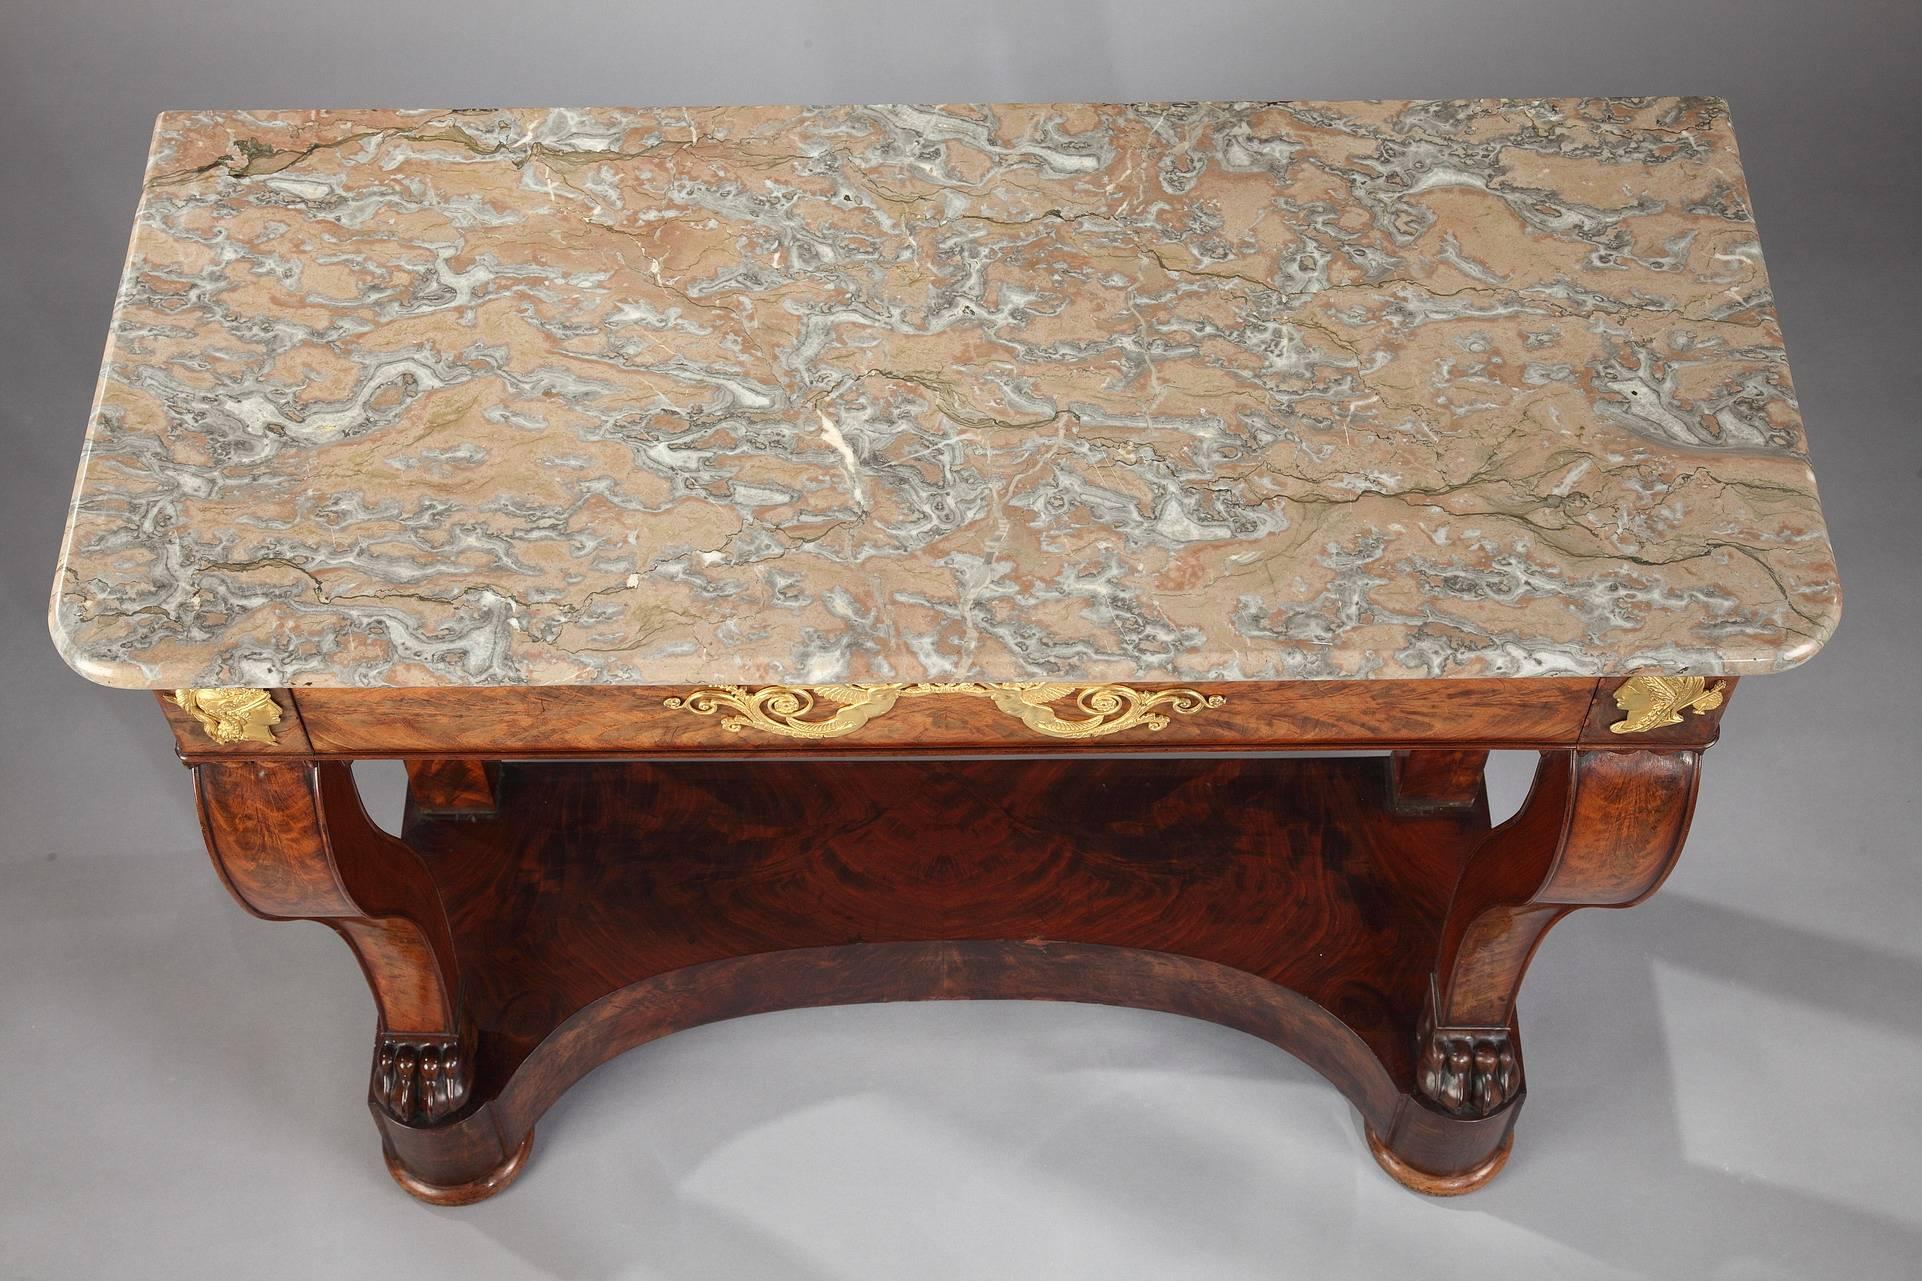 Marble Empire Mahogany Console Table Stamped by Othon Kolping